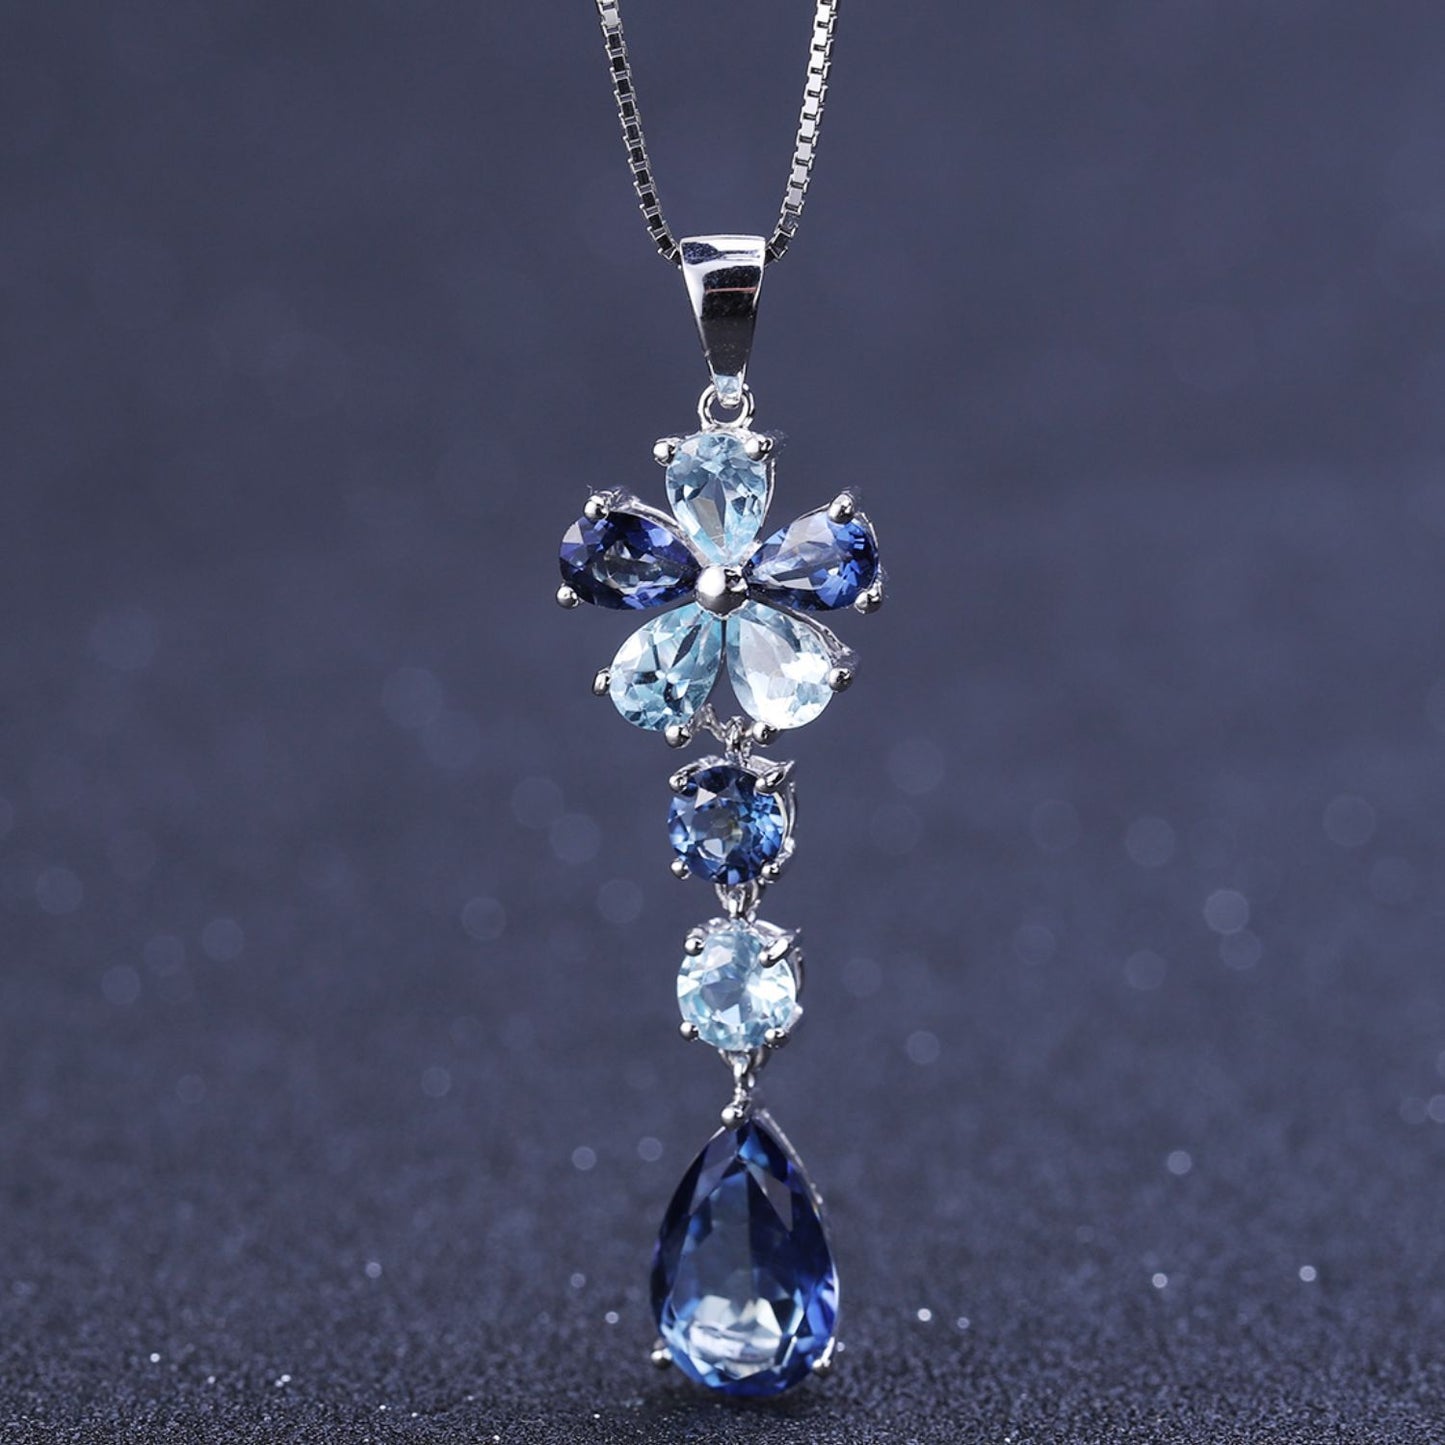 Luxury Style Inlaid Natural Topaz Pendant Sterling Silver Necklace for Women